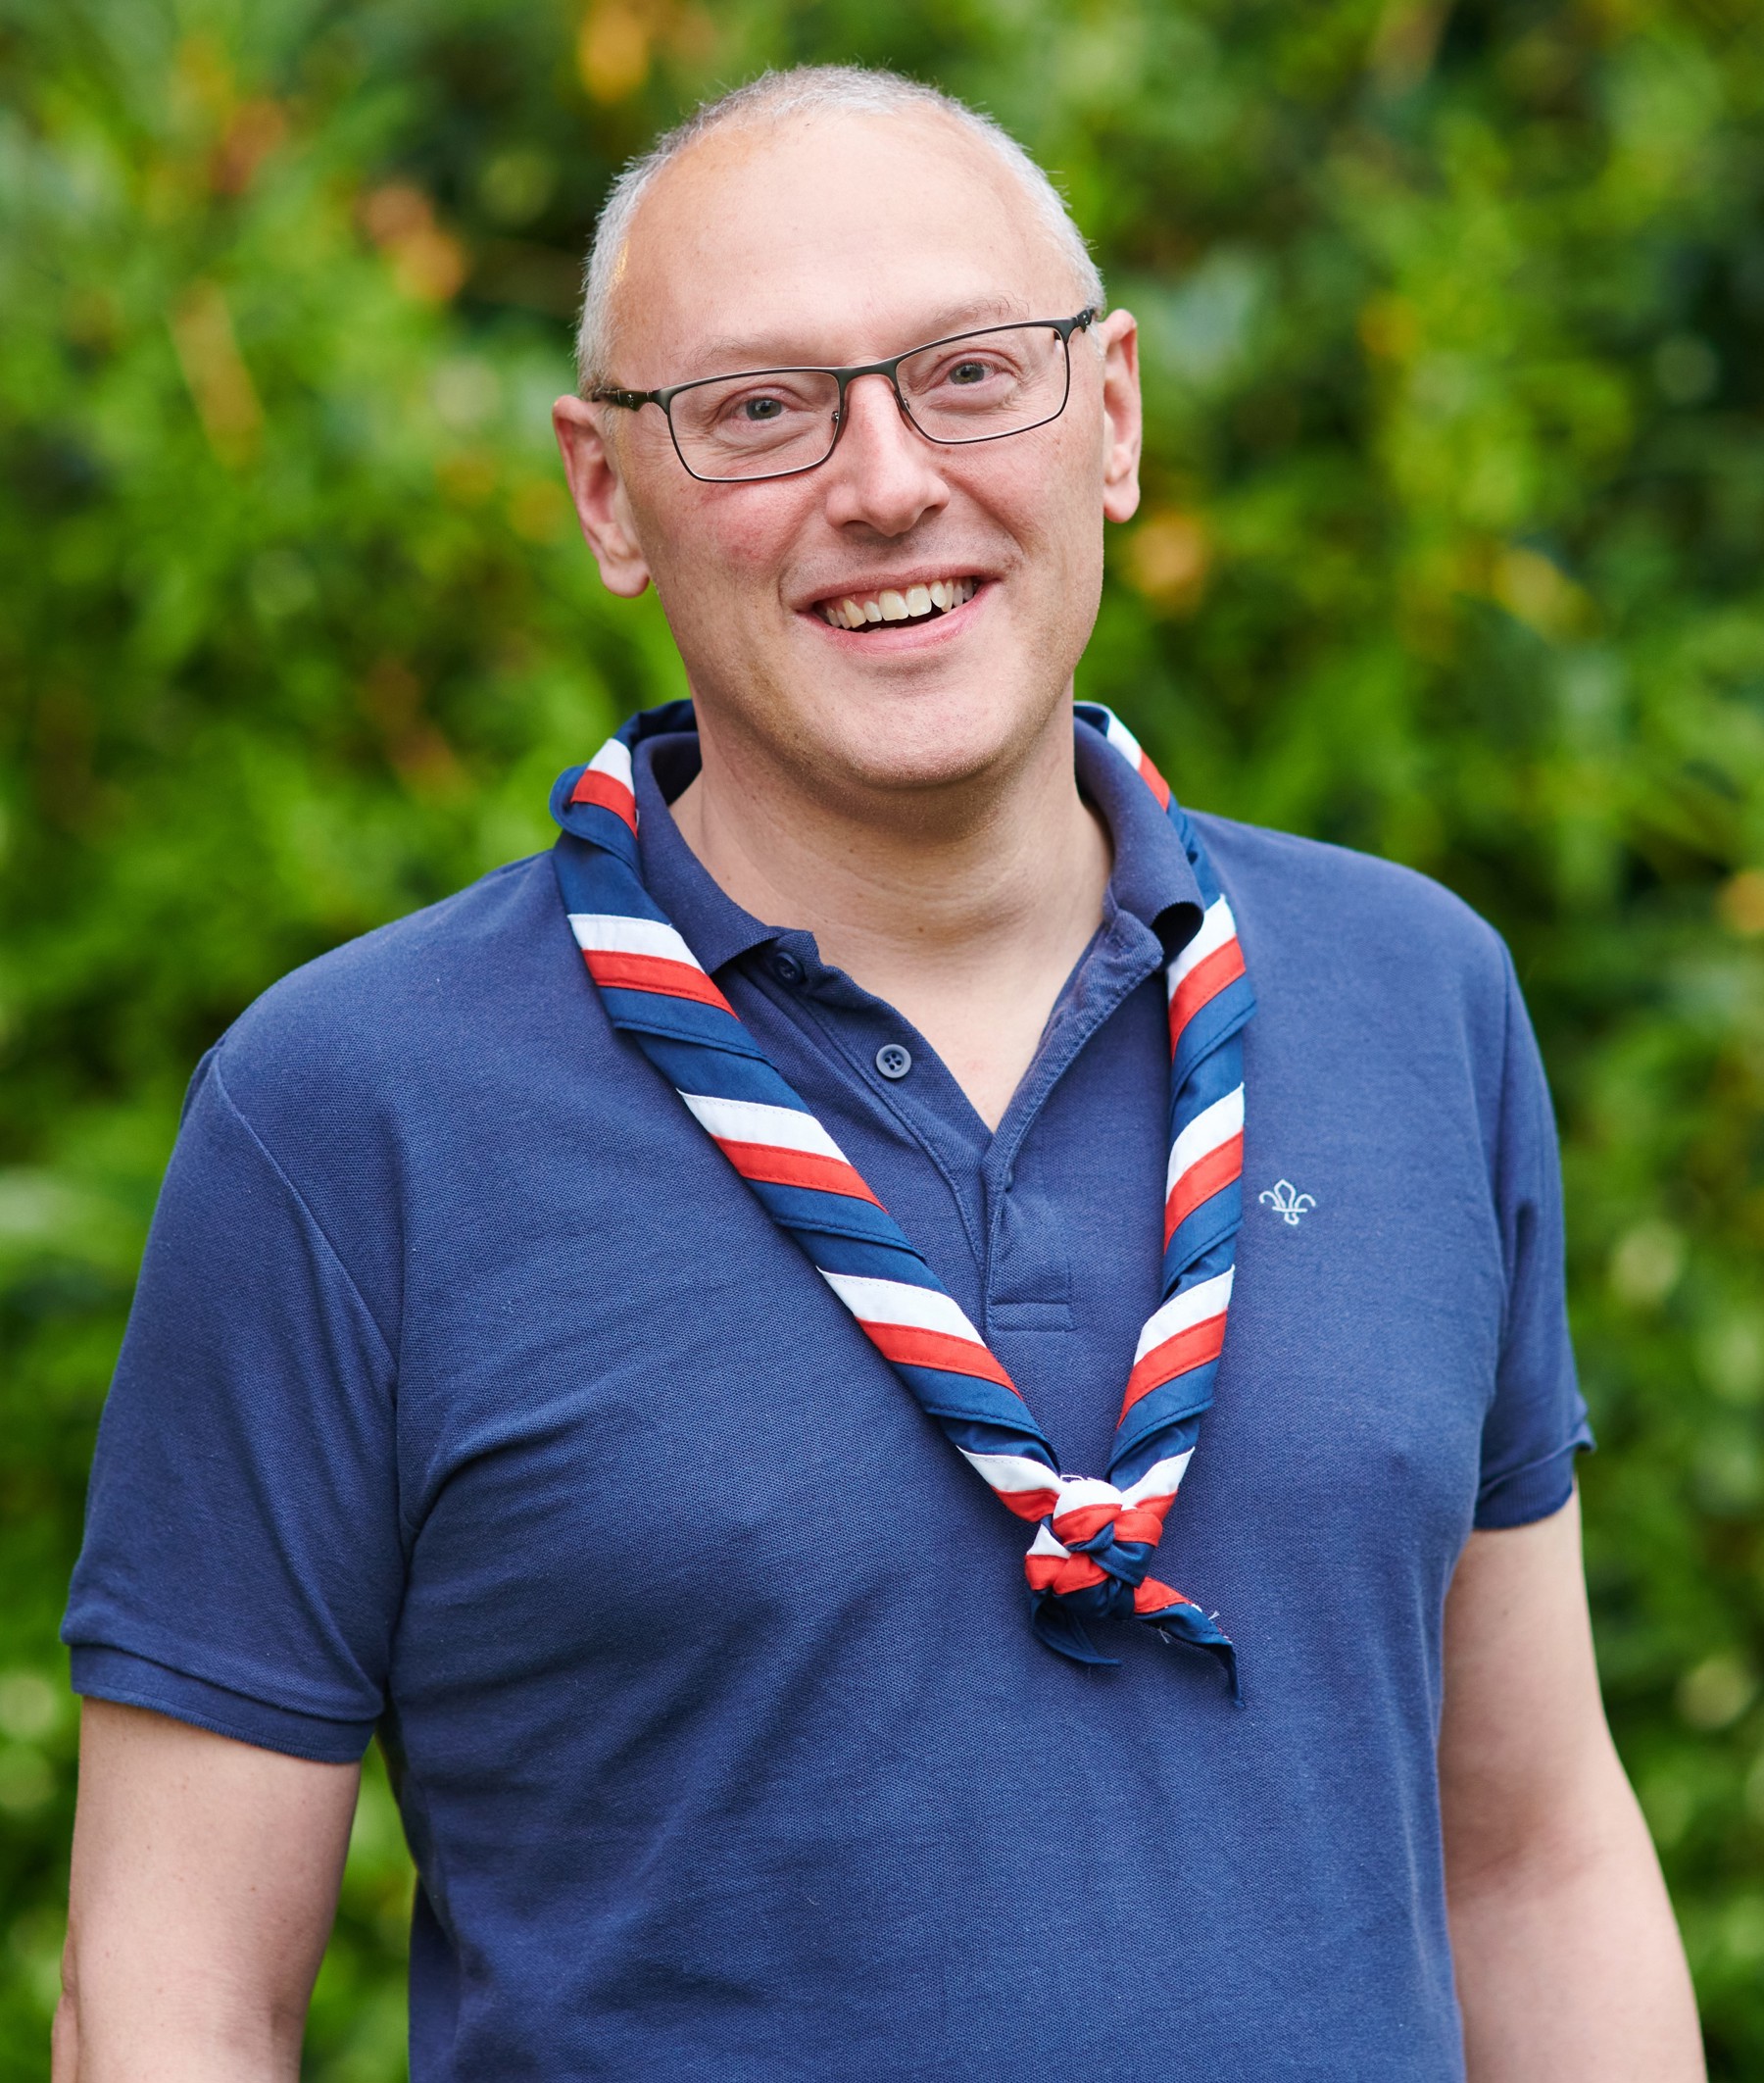 Nigel Ball smiling at the camera while wearing glasses, a navy Scouts polo shirt and stripy scarf